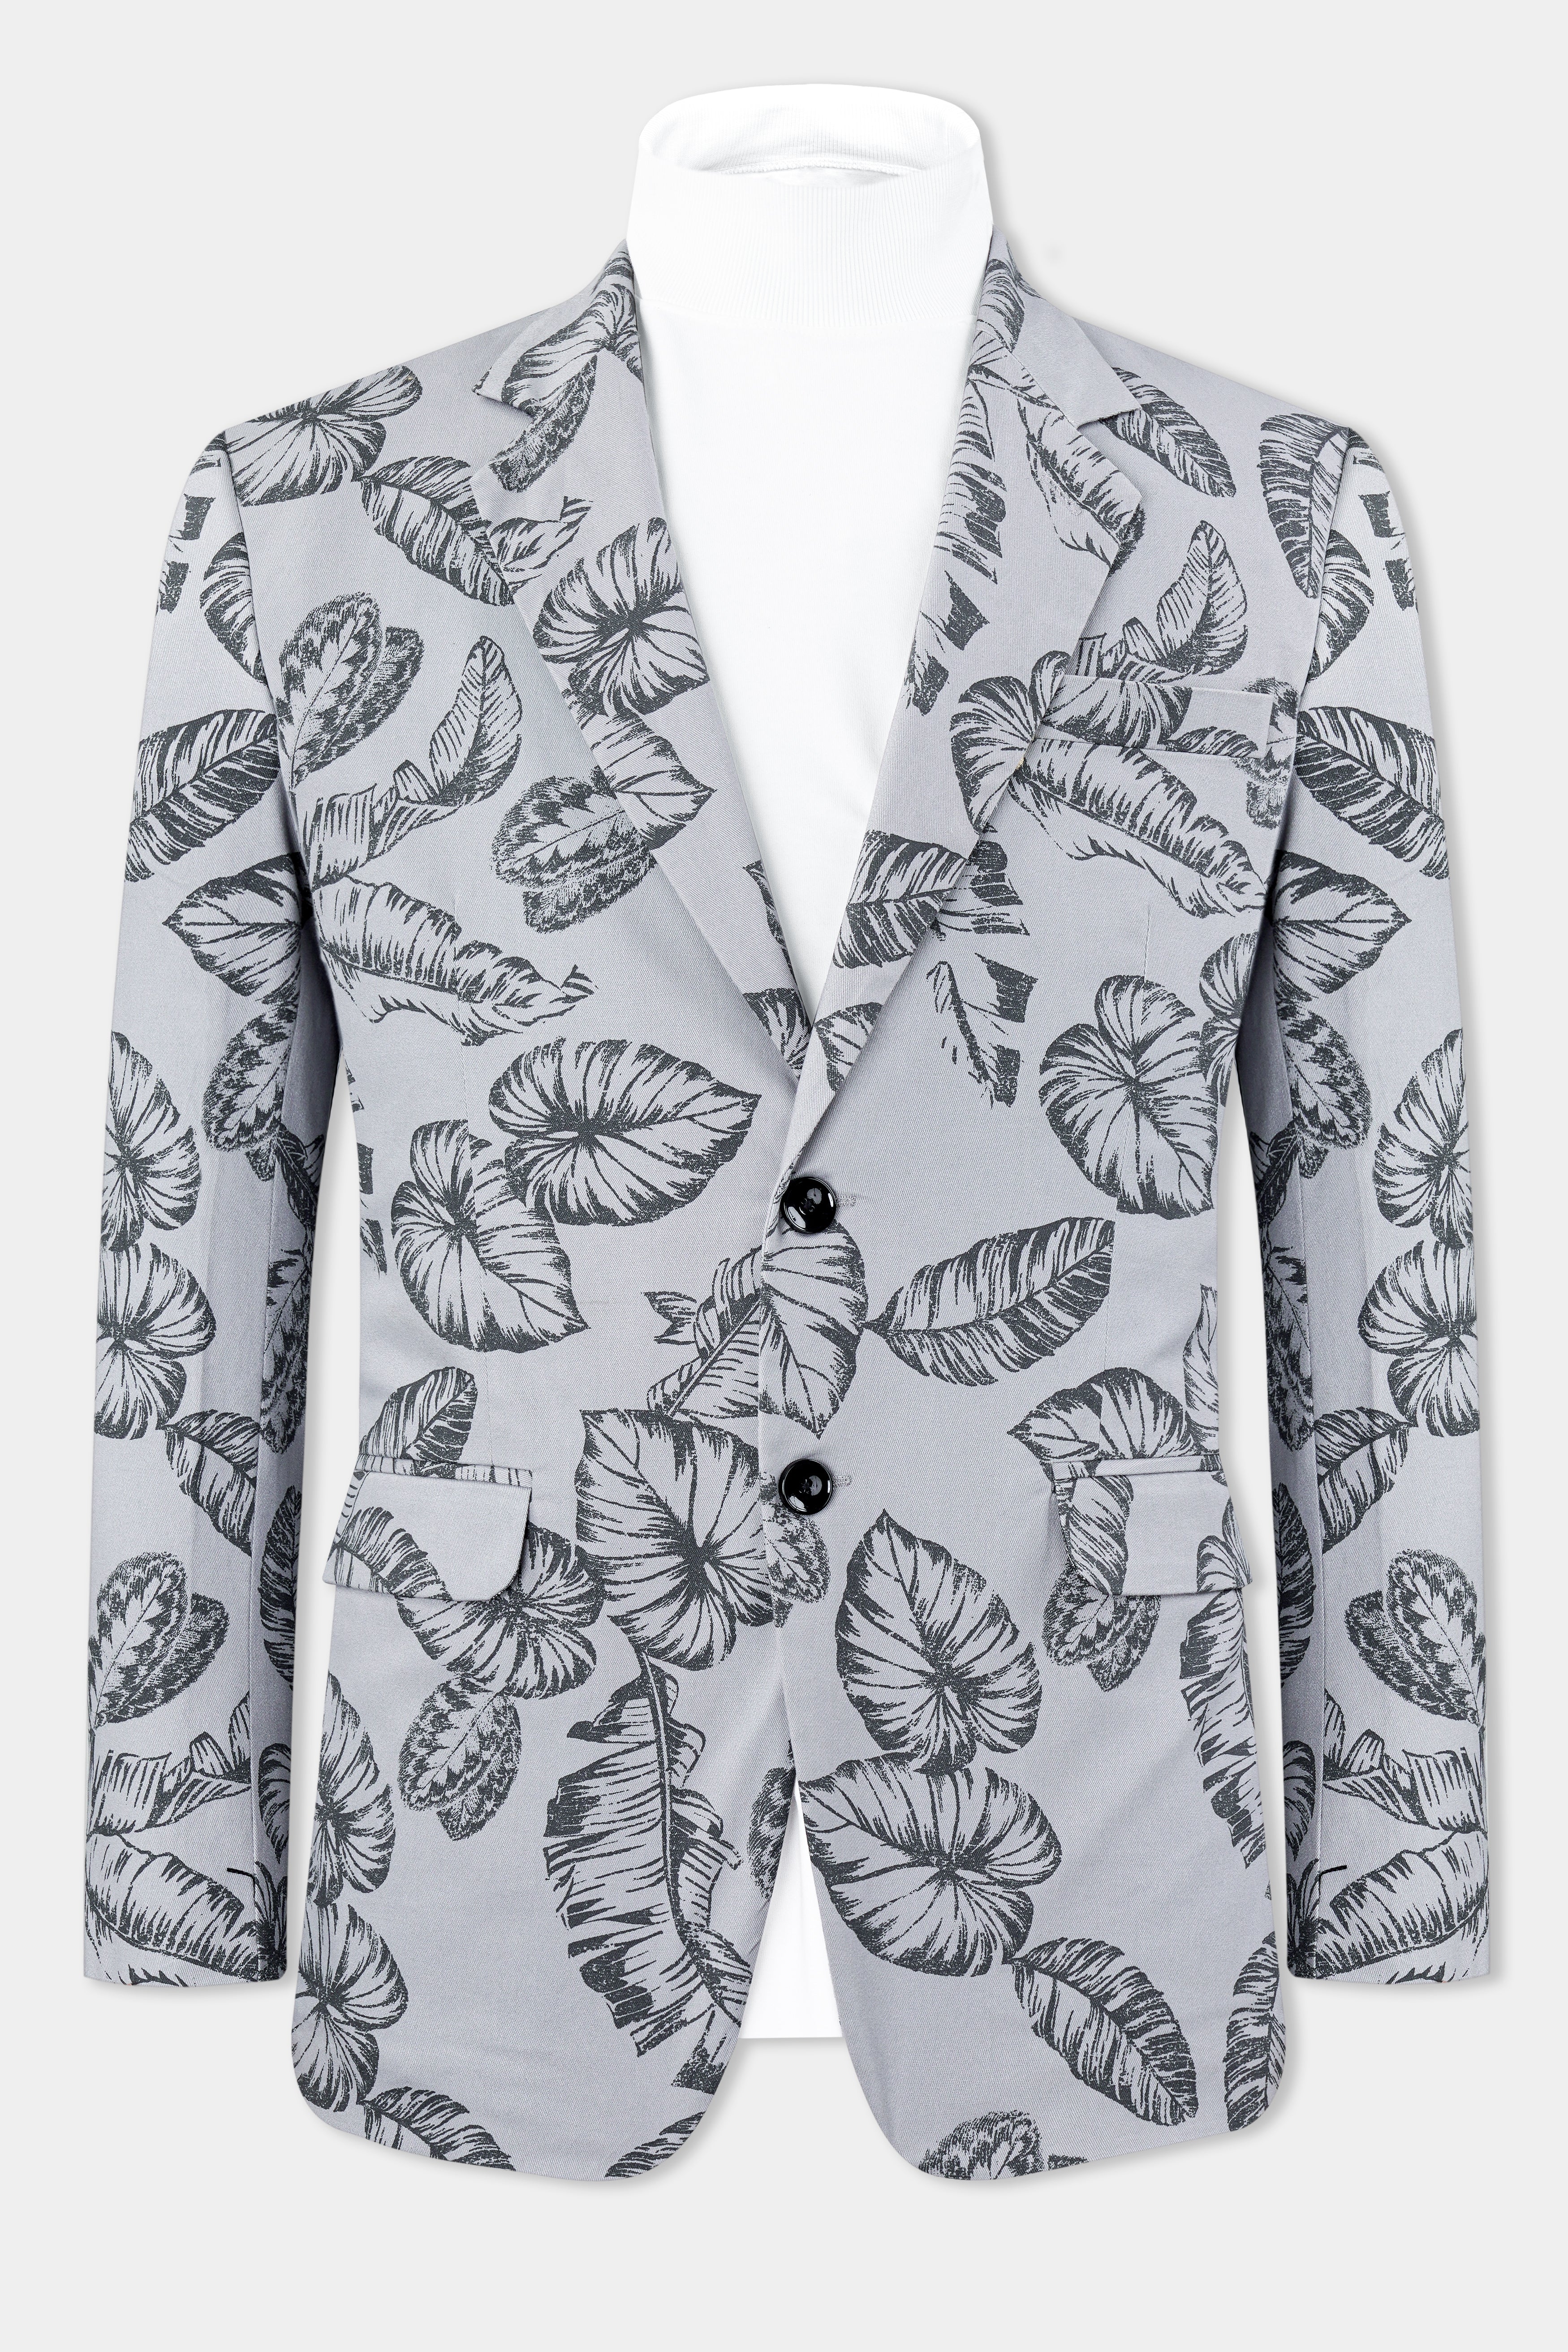 Gainsboro and Comet Gray Leaves Printed Premium Cotton Blazer BL3019-SB-36, BL3019-SB-38, BL3019-SB-40, BL3019-SB-42, BL3019-SB-44, BL3019-SB-46, BL3019-SB-48, BL3019-SB-50, BL3019-SB-52, BL3019-SB-54, BL3019-SB-56, BL3019-SB-58, BL3019-SB-60